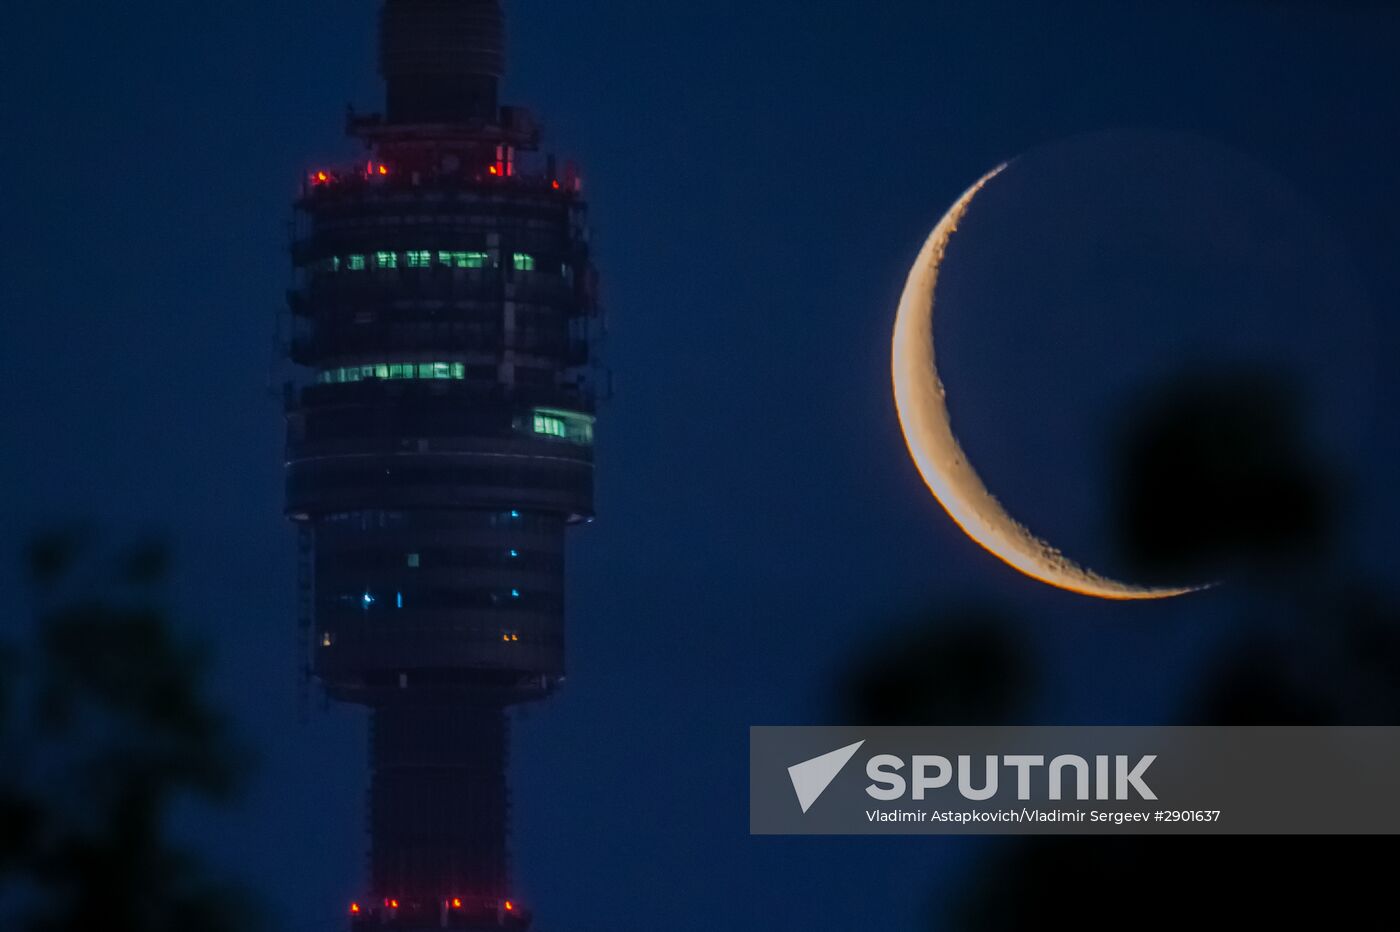 Observation plarform of the Ostankino TV tower against the background of the decrescent Moon